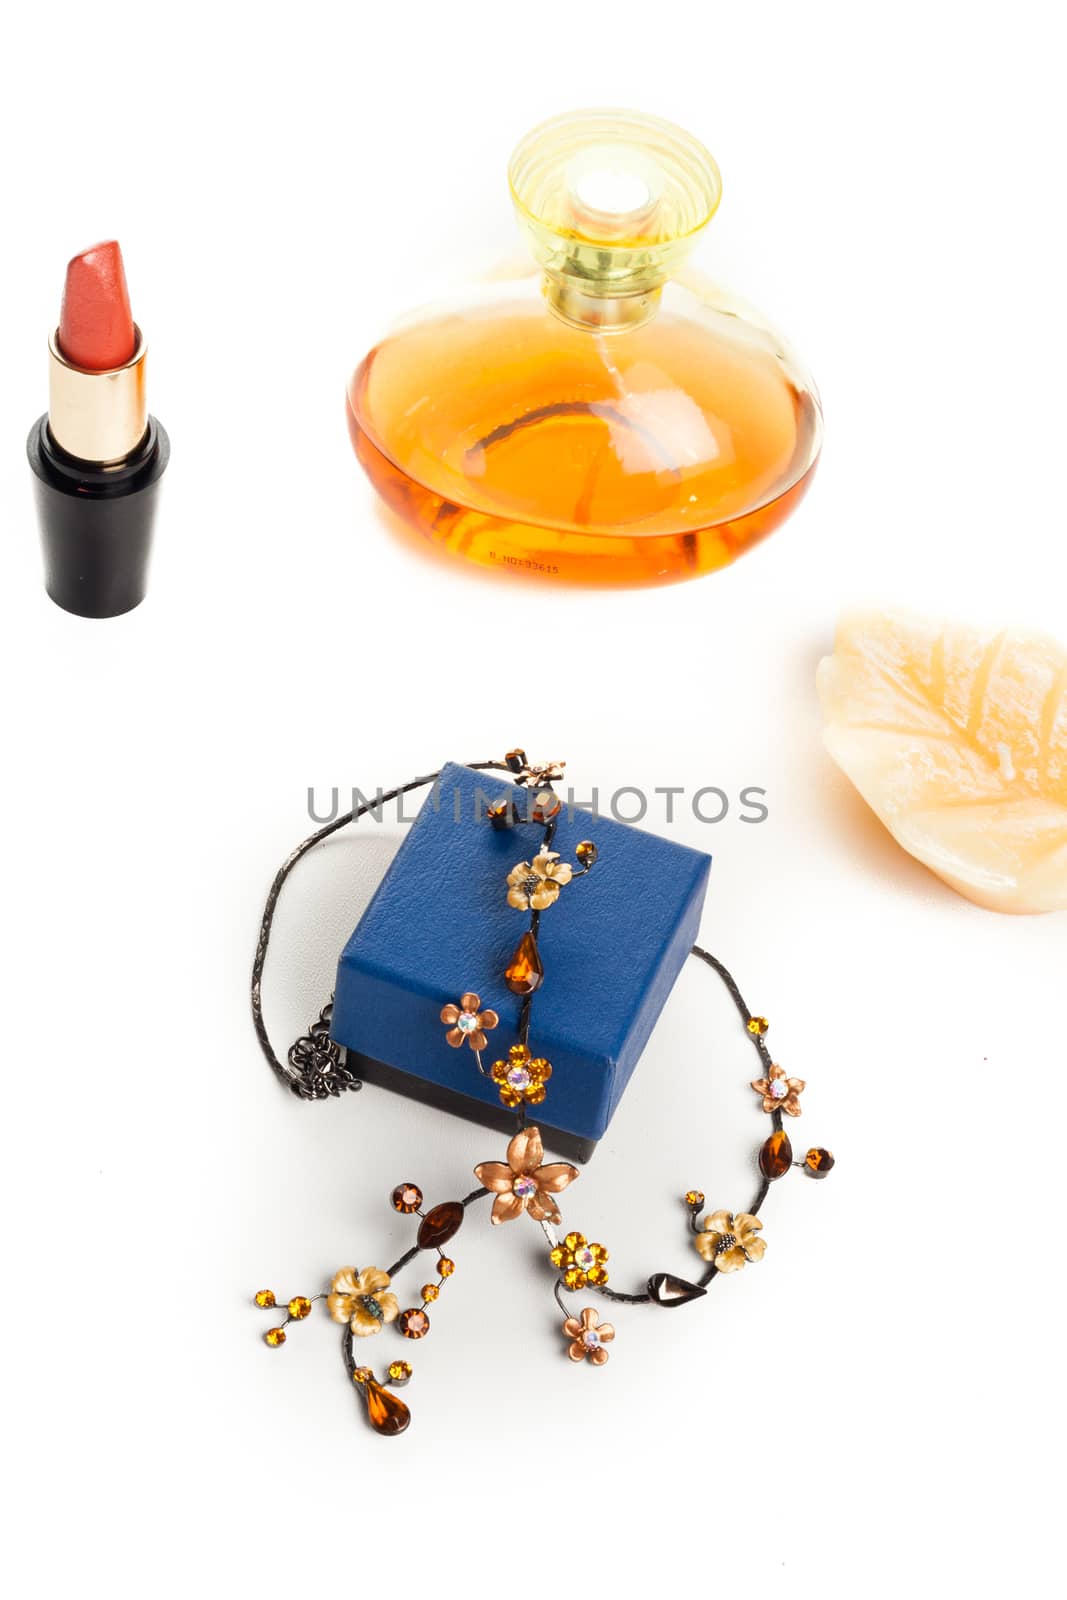 fashion necklace with box, perfume bottle and red lipstick